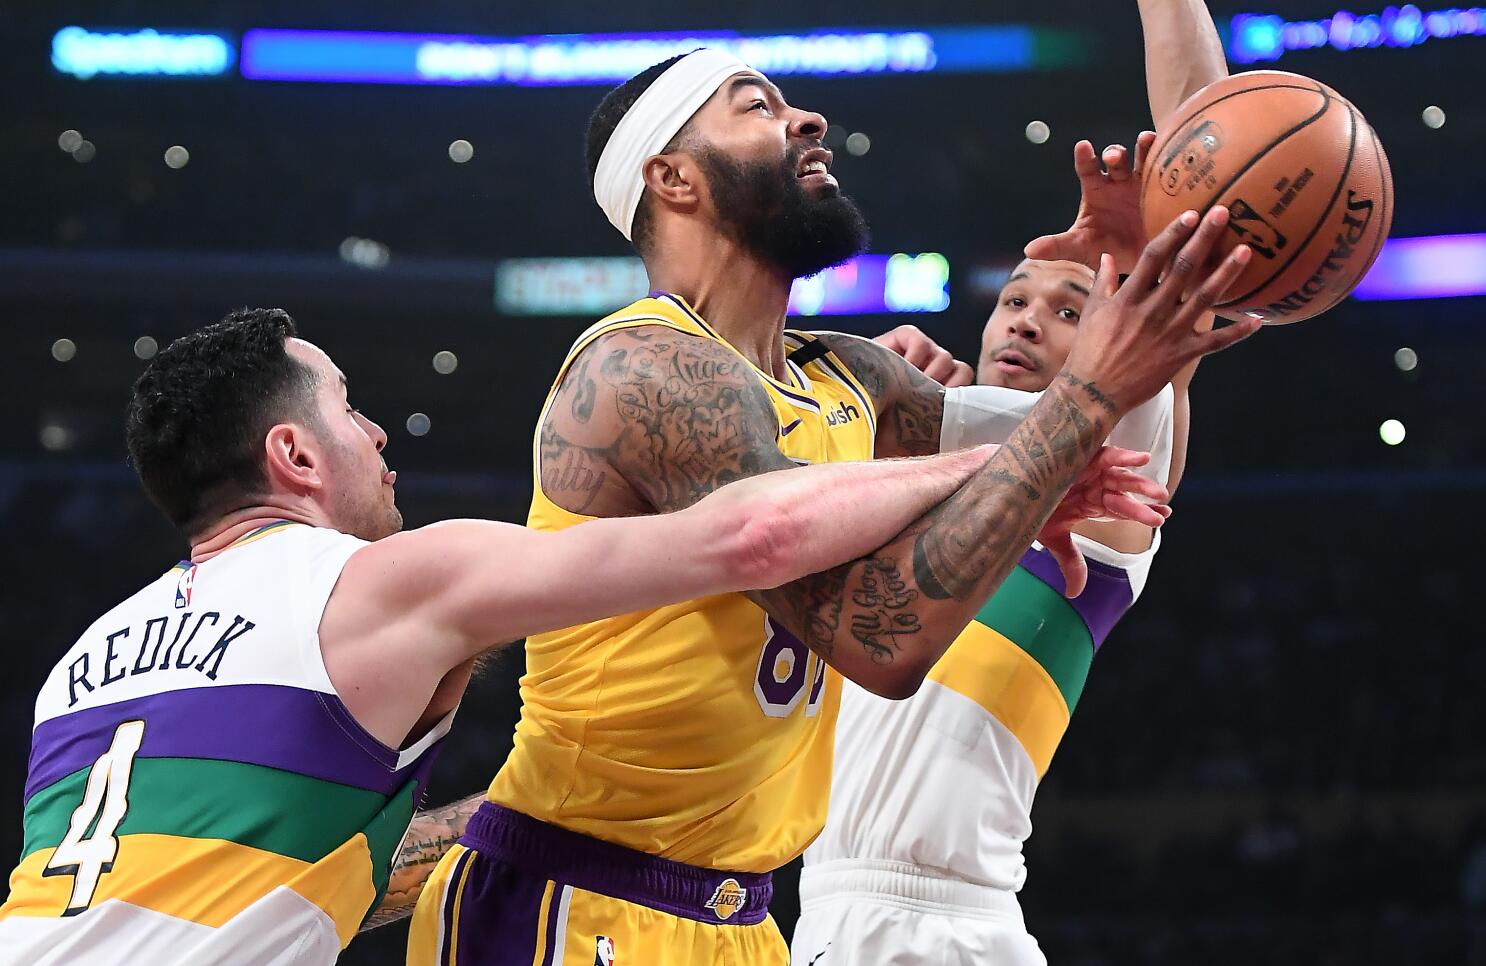 Lakers vs Clippers rescheduled for April 9 after postponement